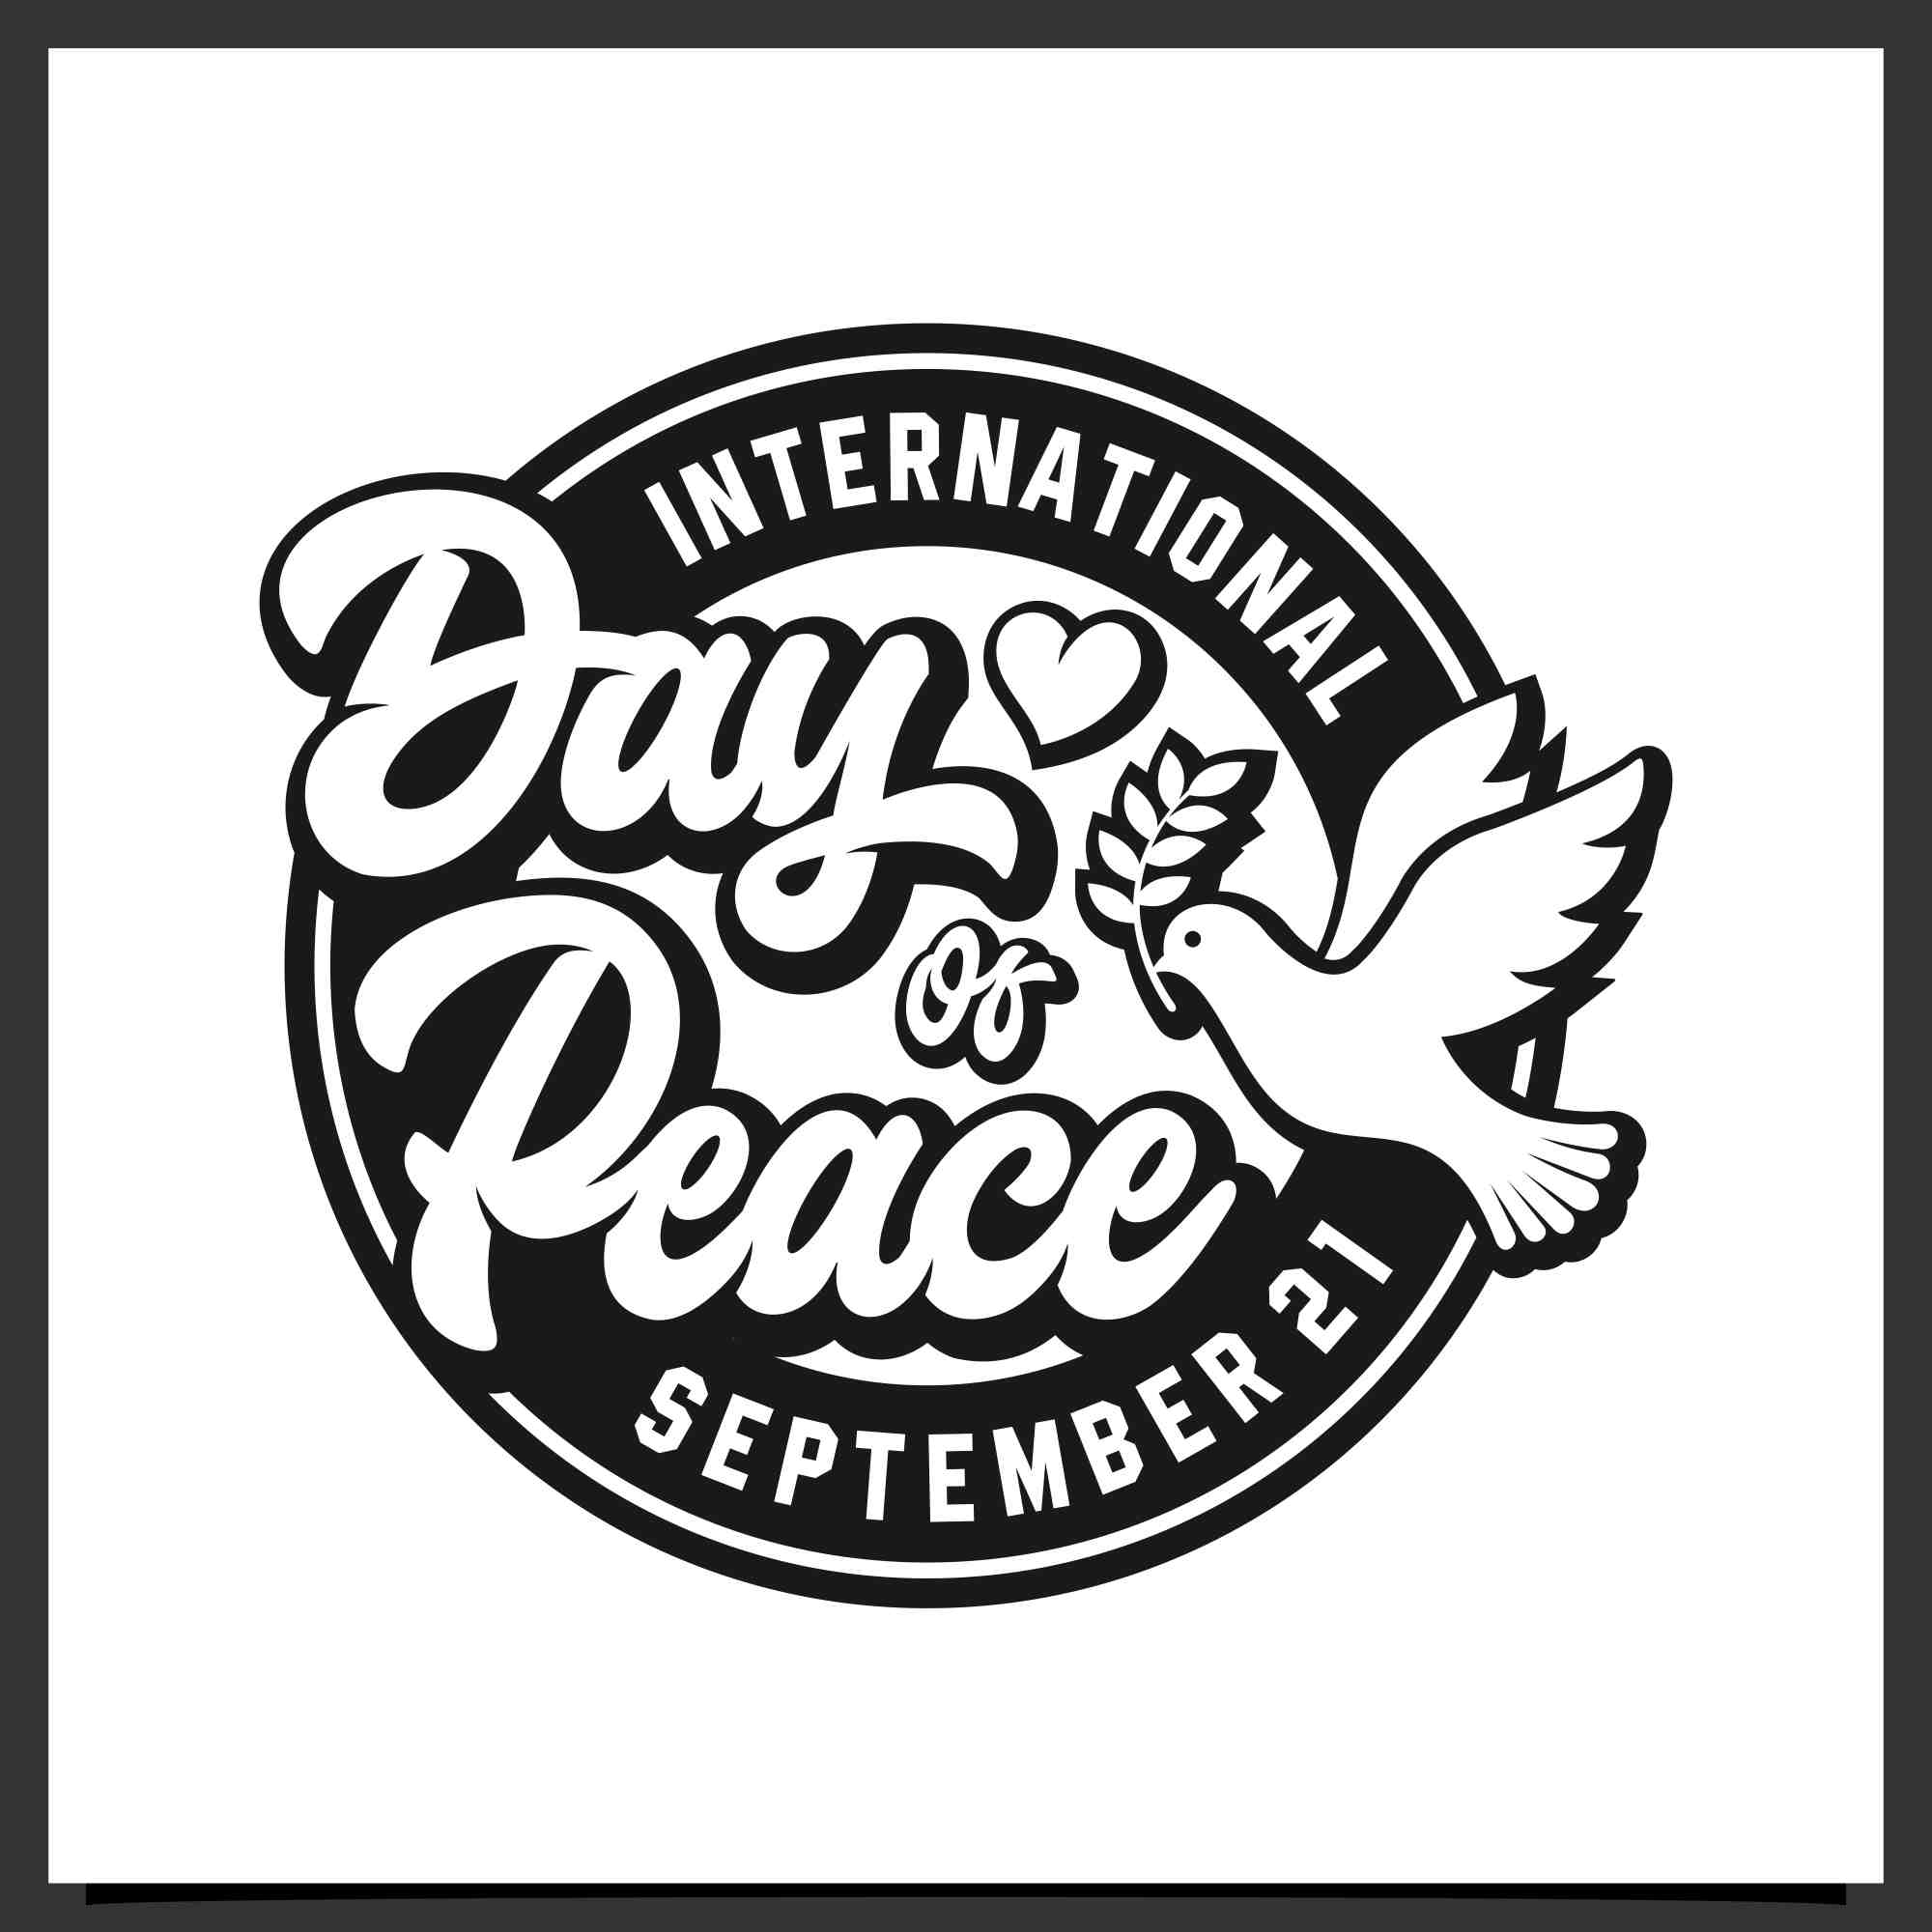 15 International day peace design logo collection - $8 preview image.